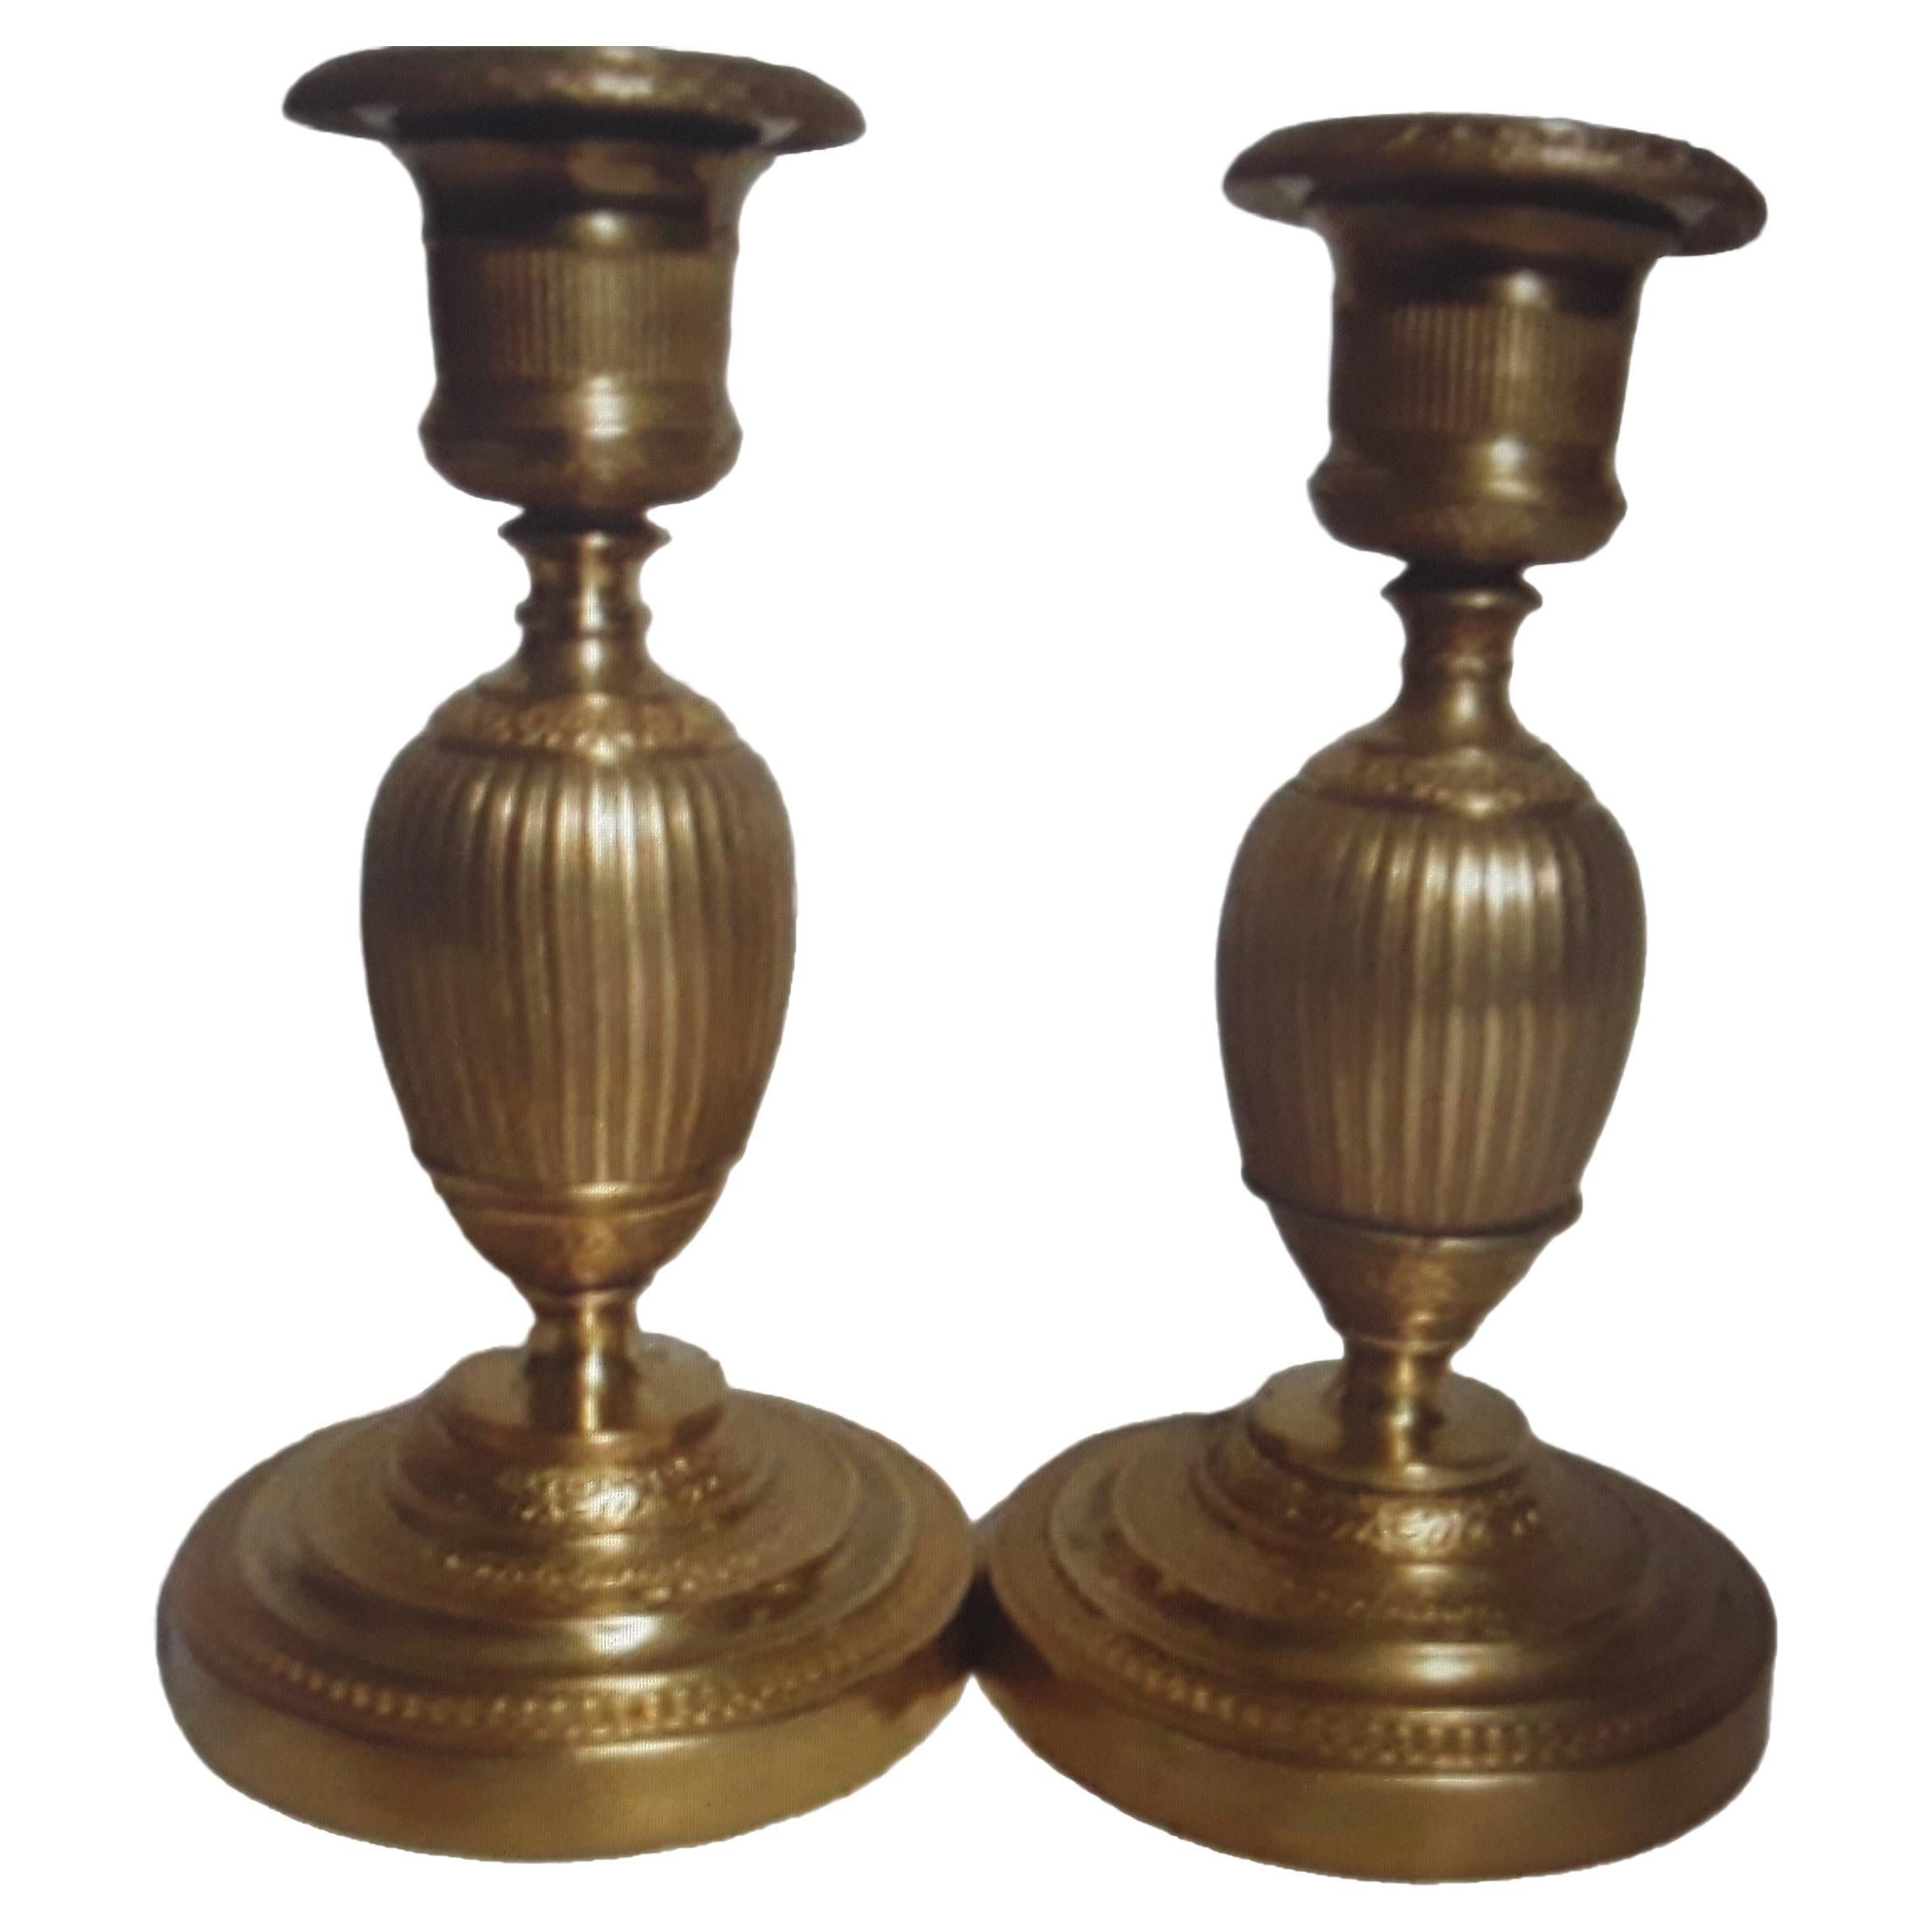 Pair c1810 French Empire Gilt Bronze Detailed Ovoid Form Candle Holders